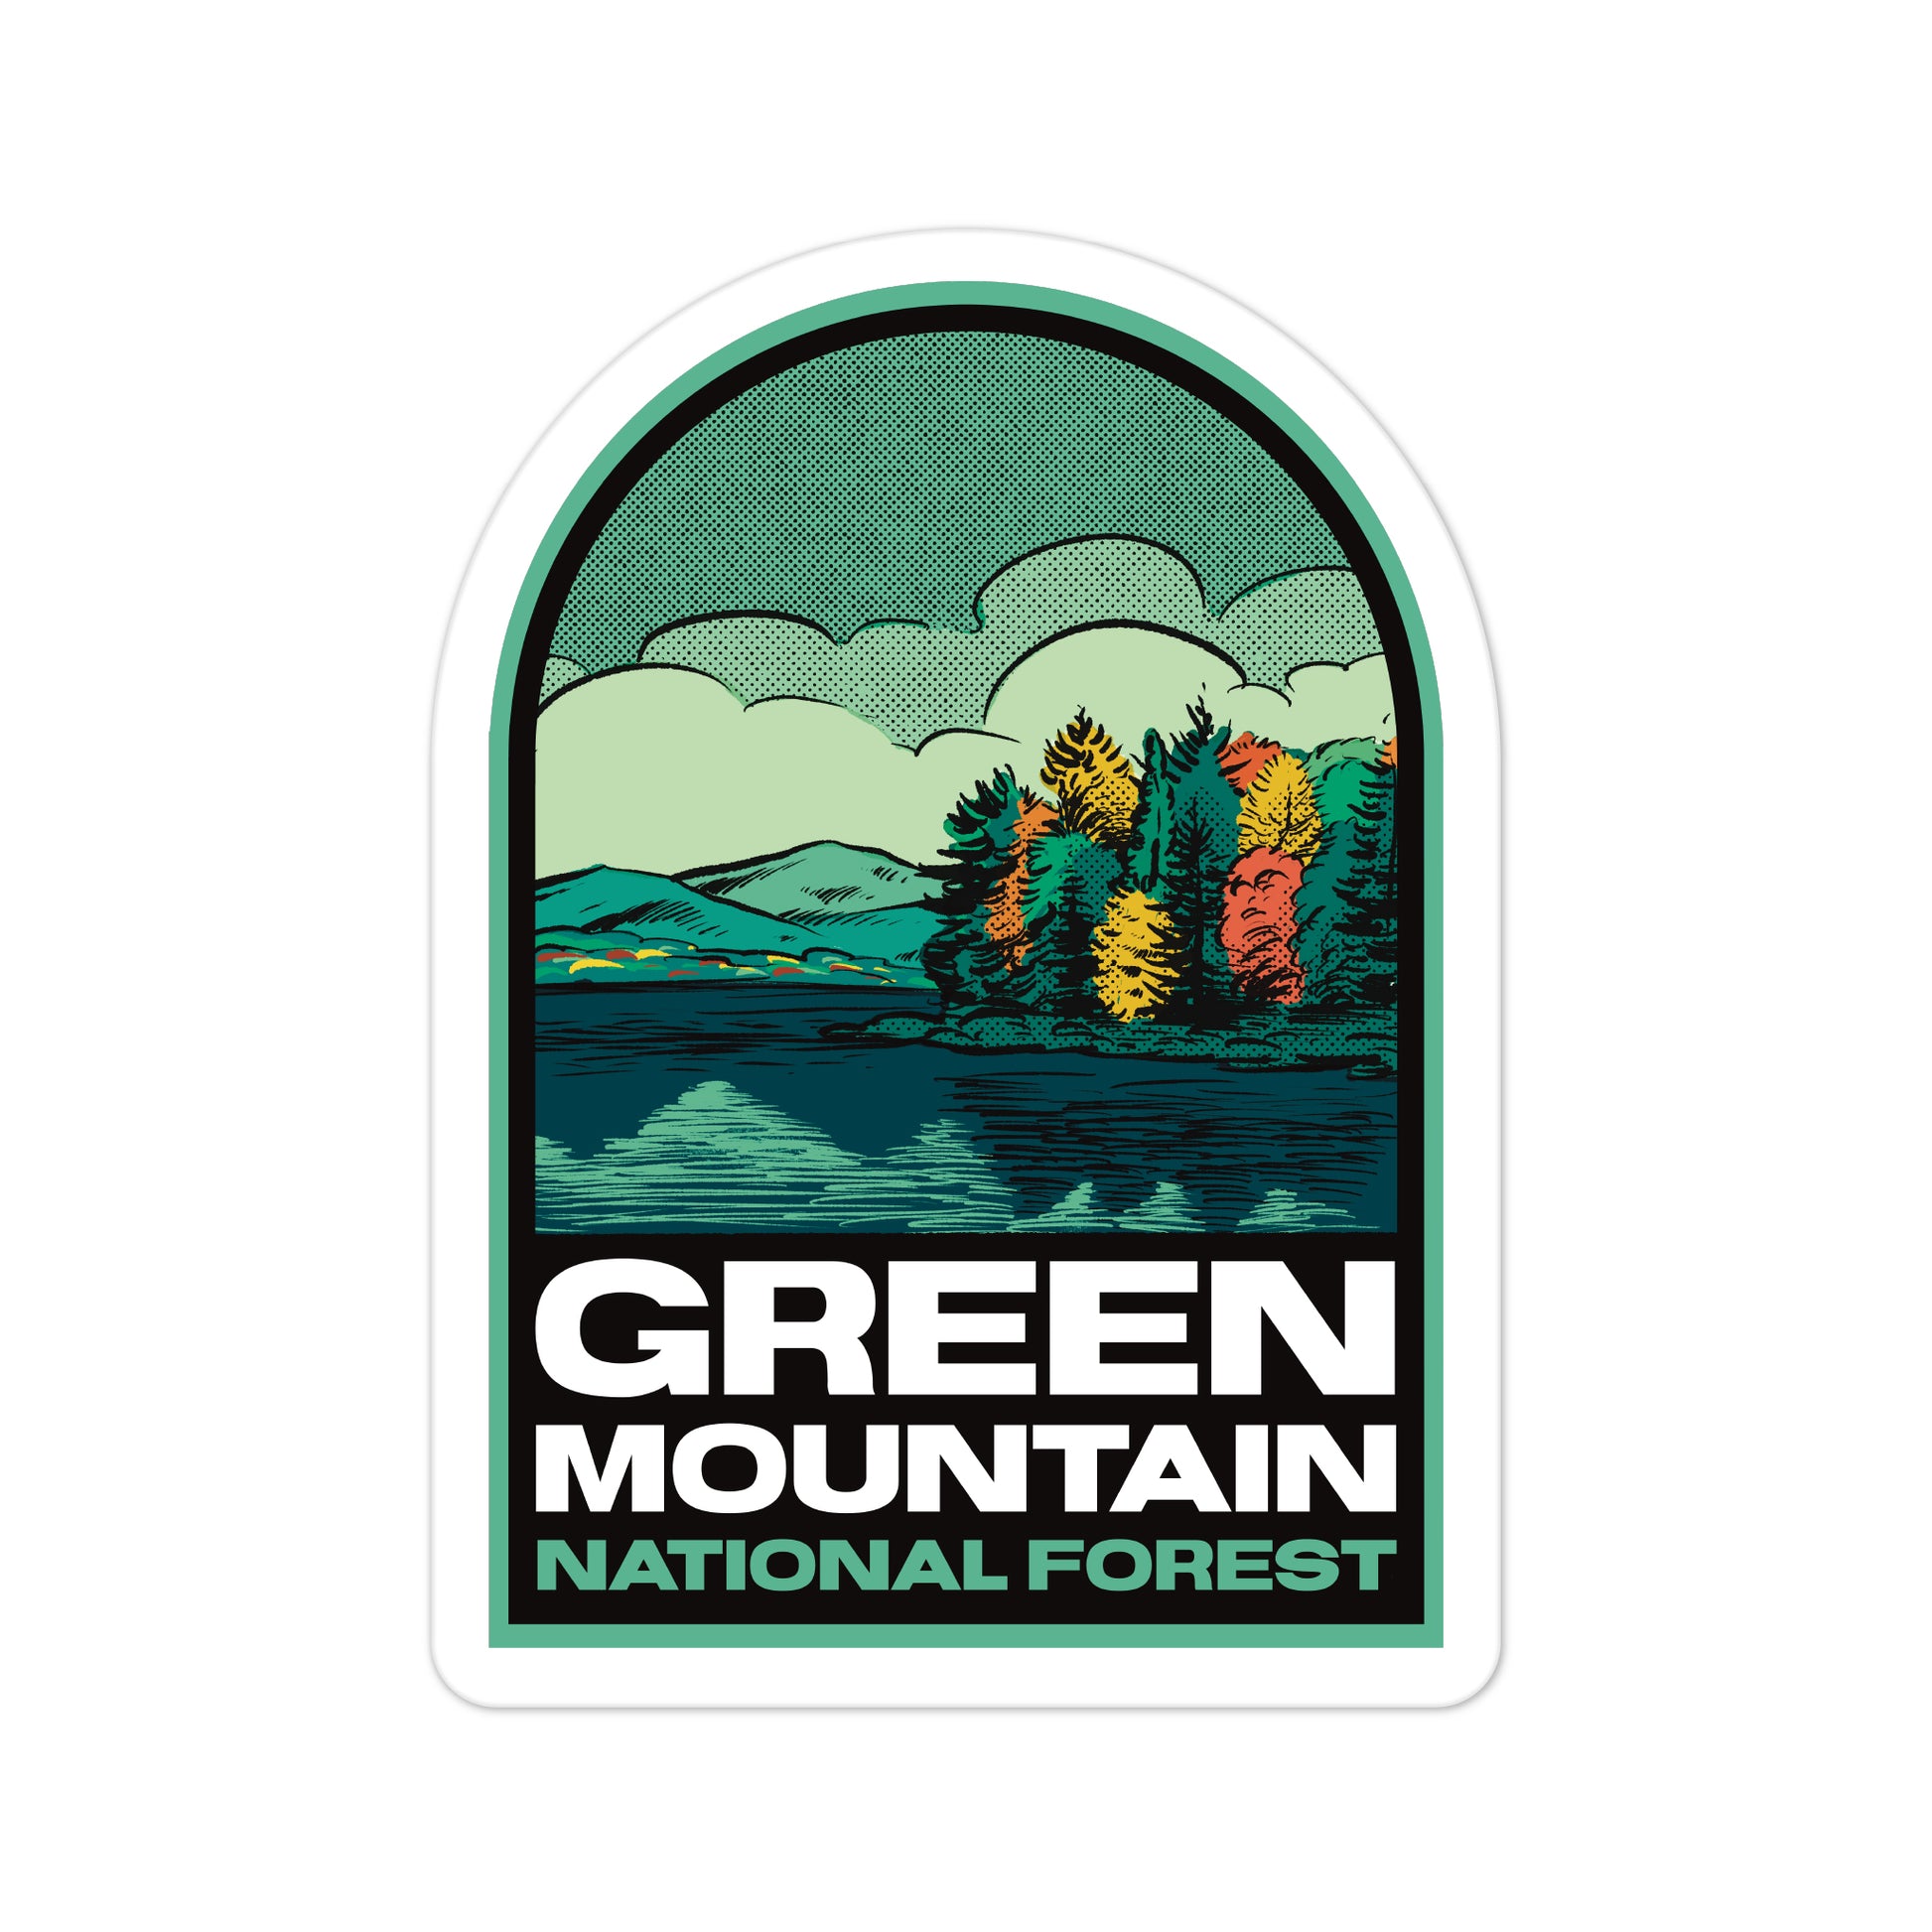 A sticker of Green Mountain National Forest